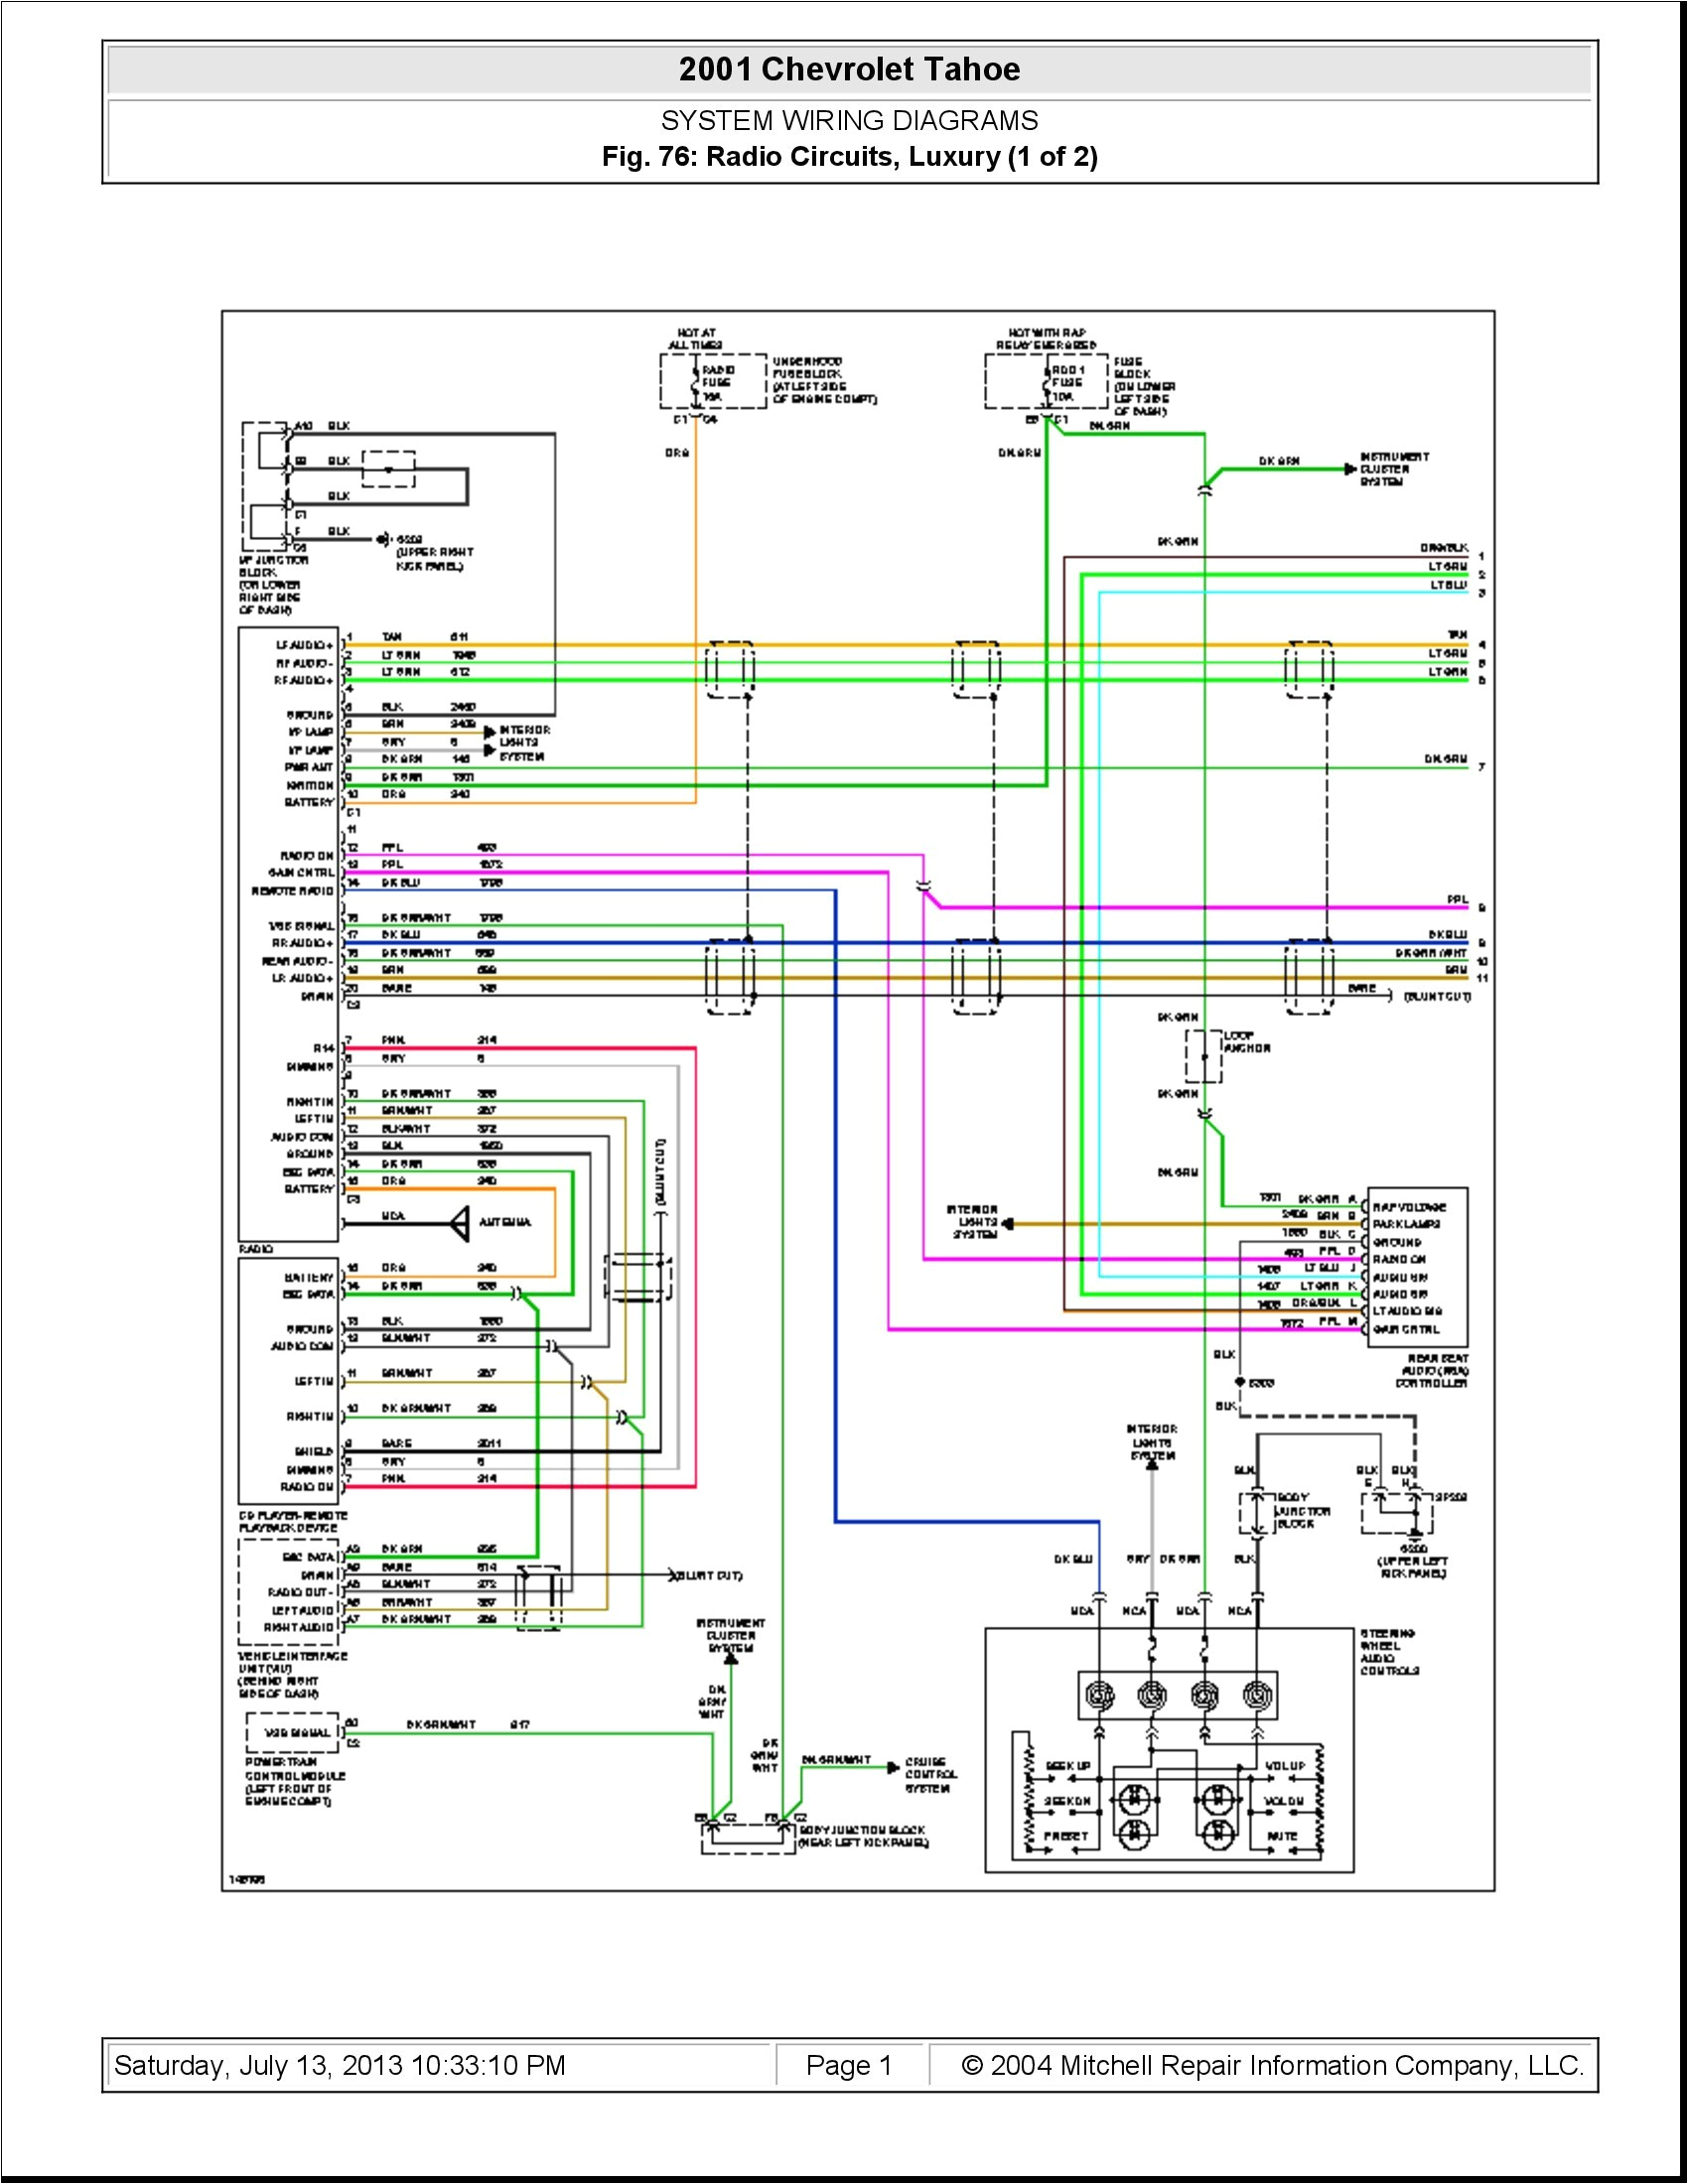 chevy wiring harness diagram wiring diagram today 2001 chevy impala wiring harness diagram 2001 chevy wiring harness diagram